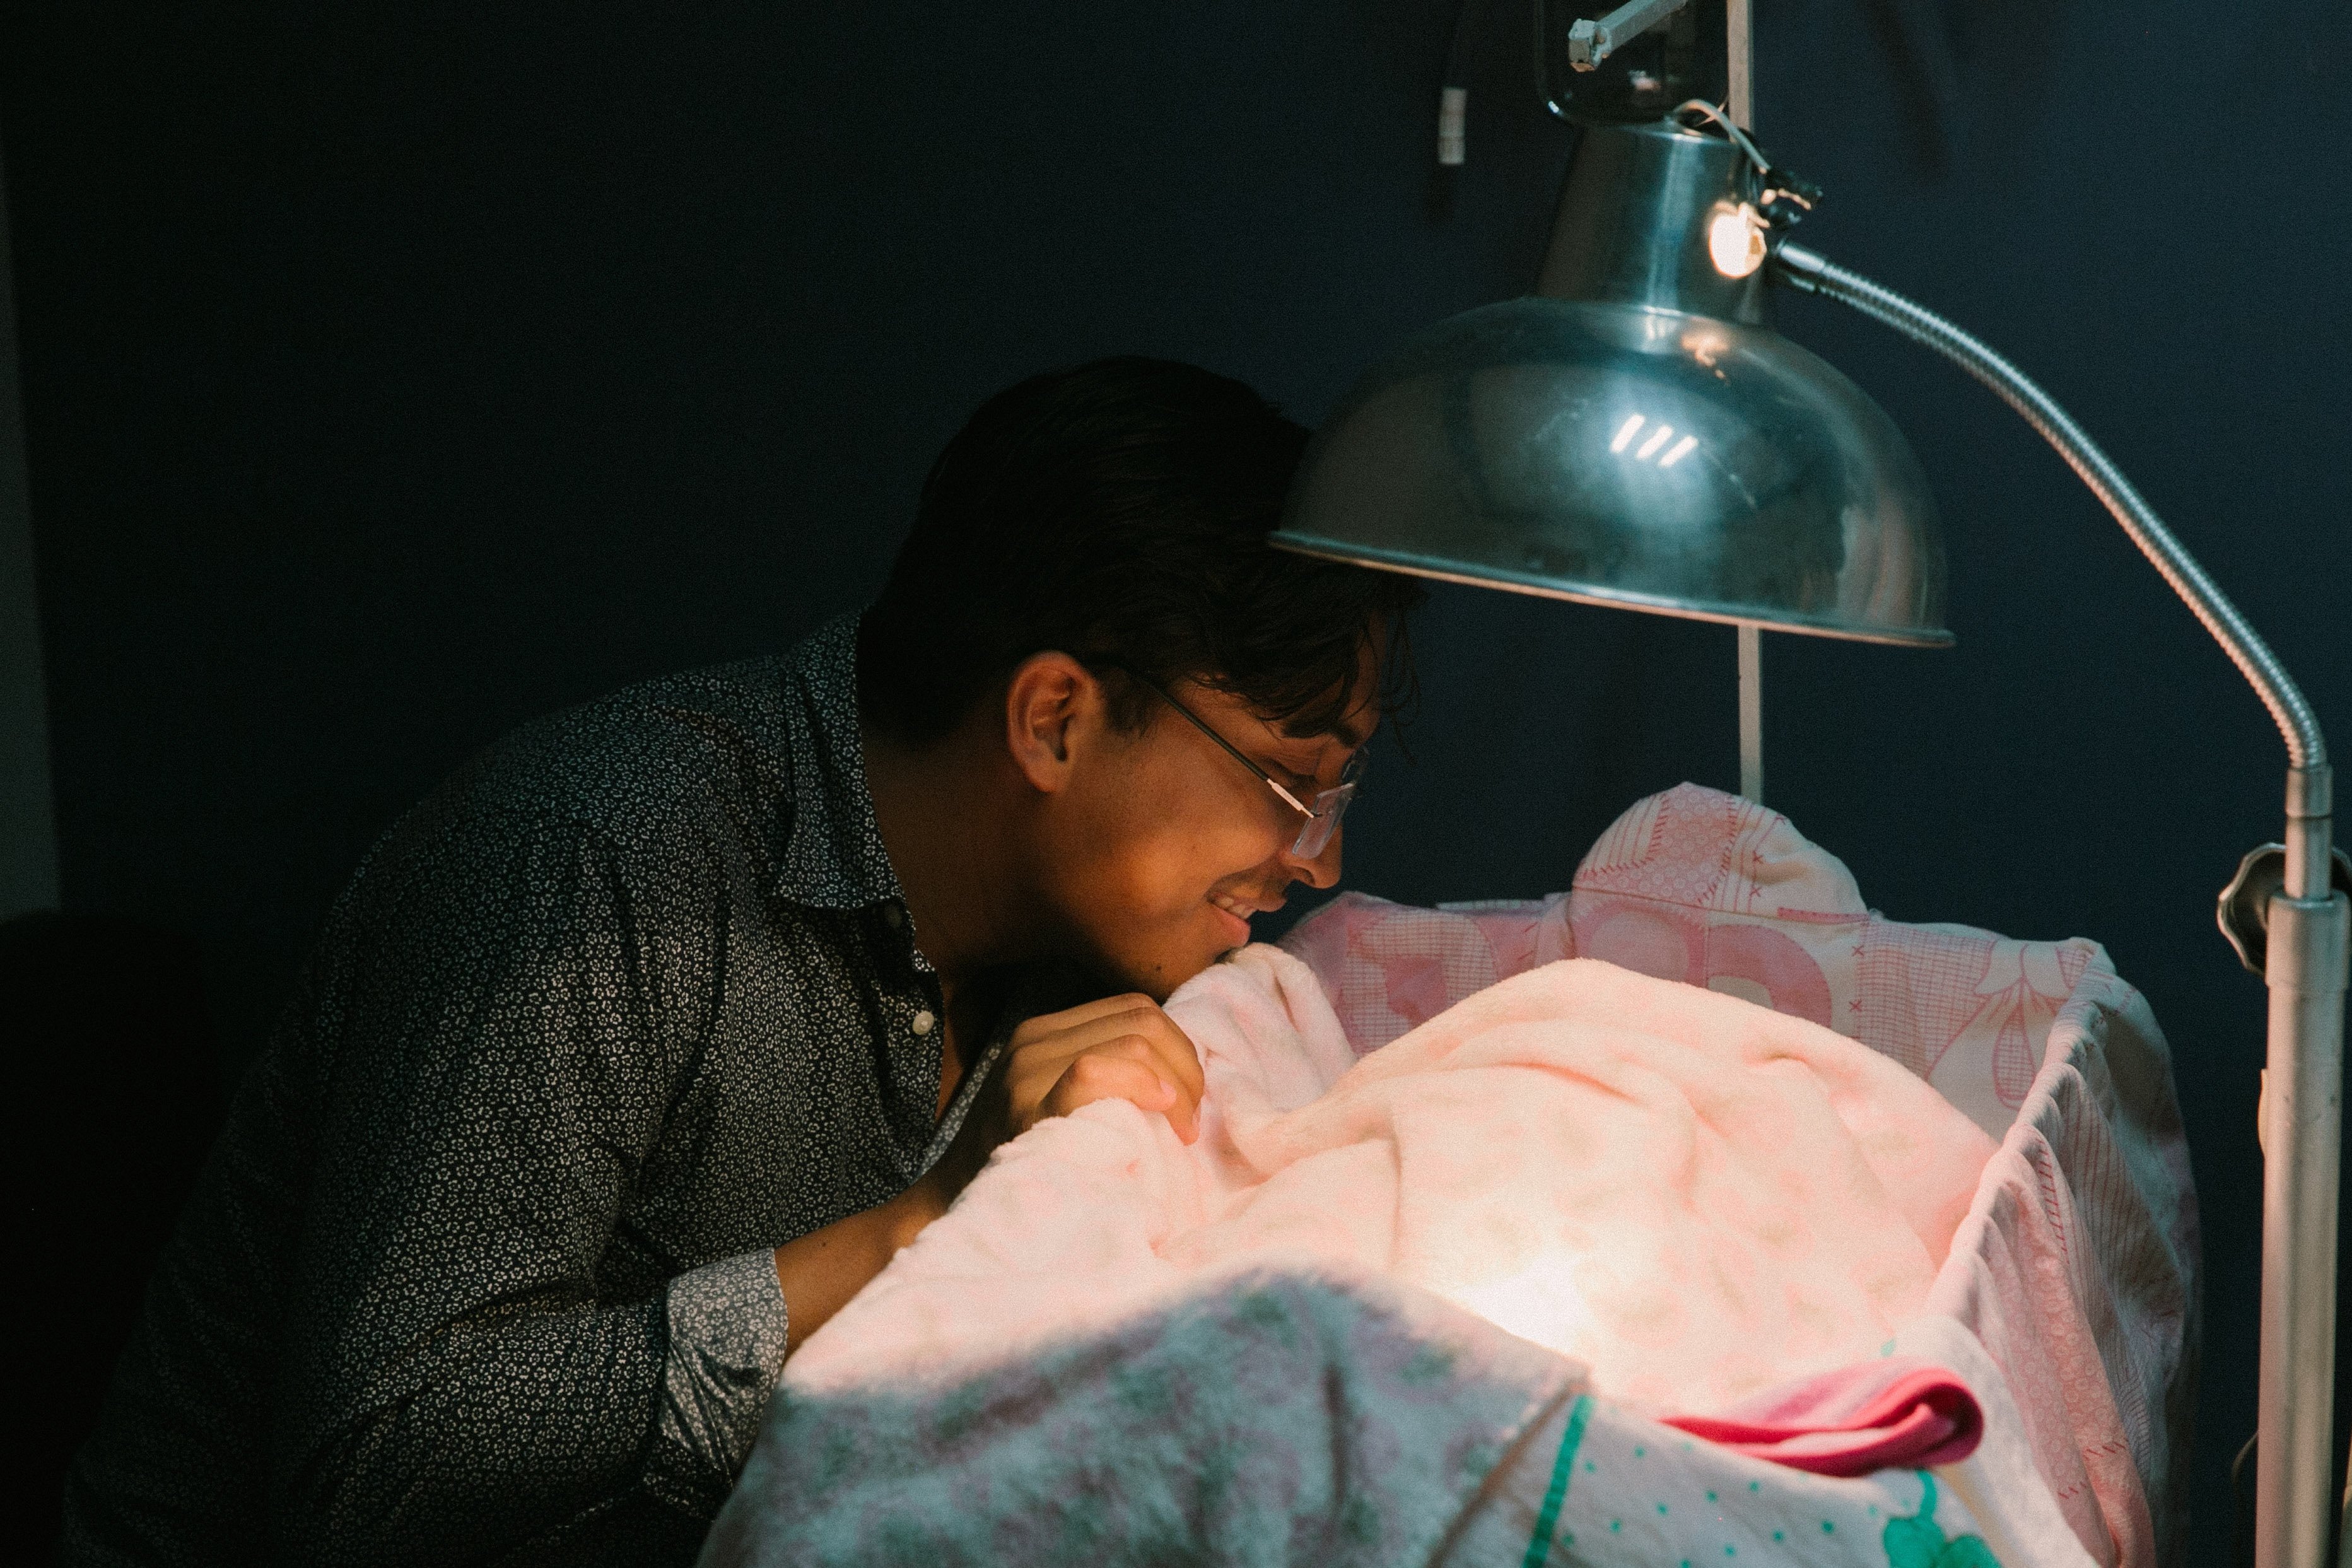 A young man watching a baby at a NICU | Photo by César Abner Martínez Aguilar on Unsplash